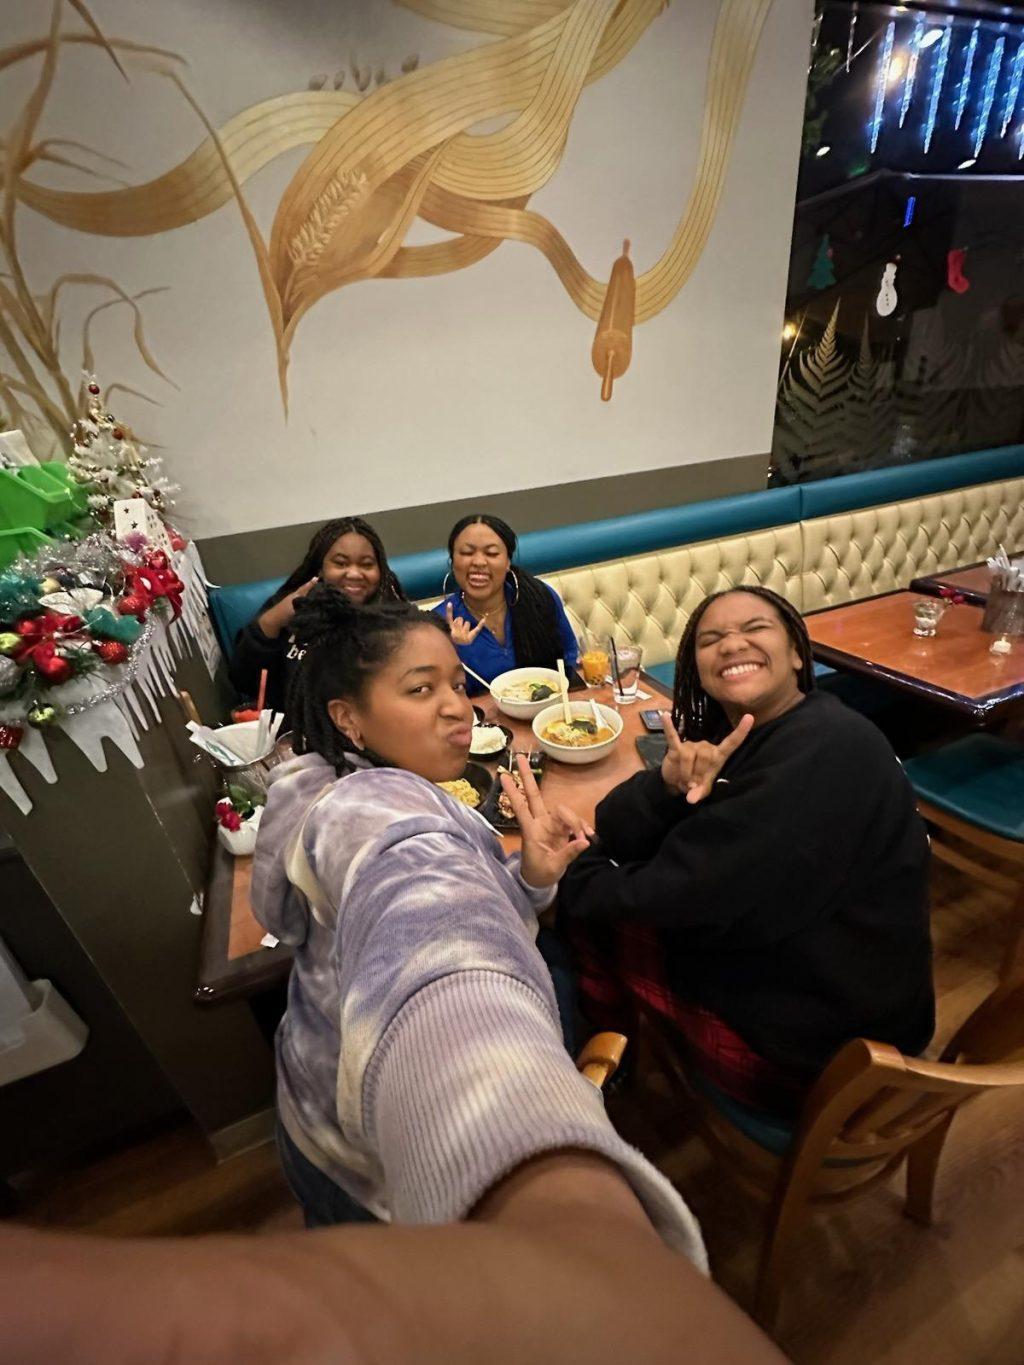 Turner and her suitemates during the last few moments of the fall 2023 semester. They shared each other's company over a meal at Tsuki Ramen. Photo courtesy of Heavenlyn Turner